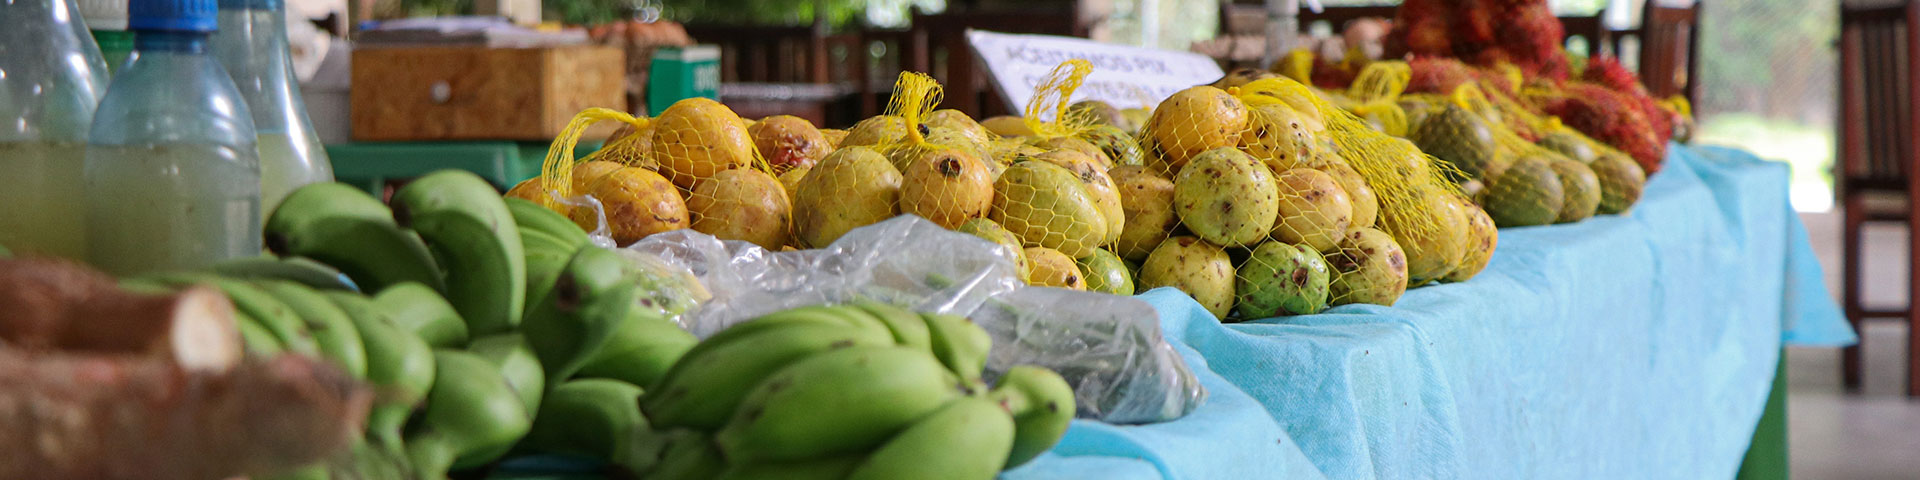 Diverse fruits are presented on a long table.